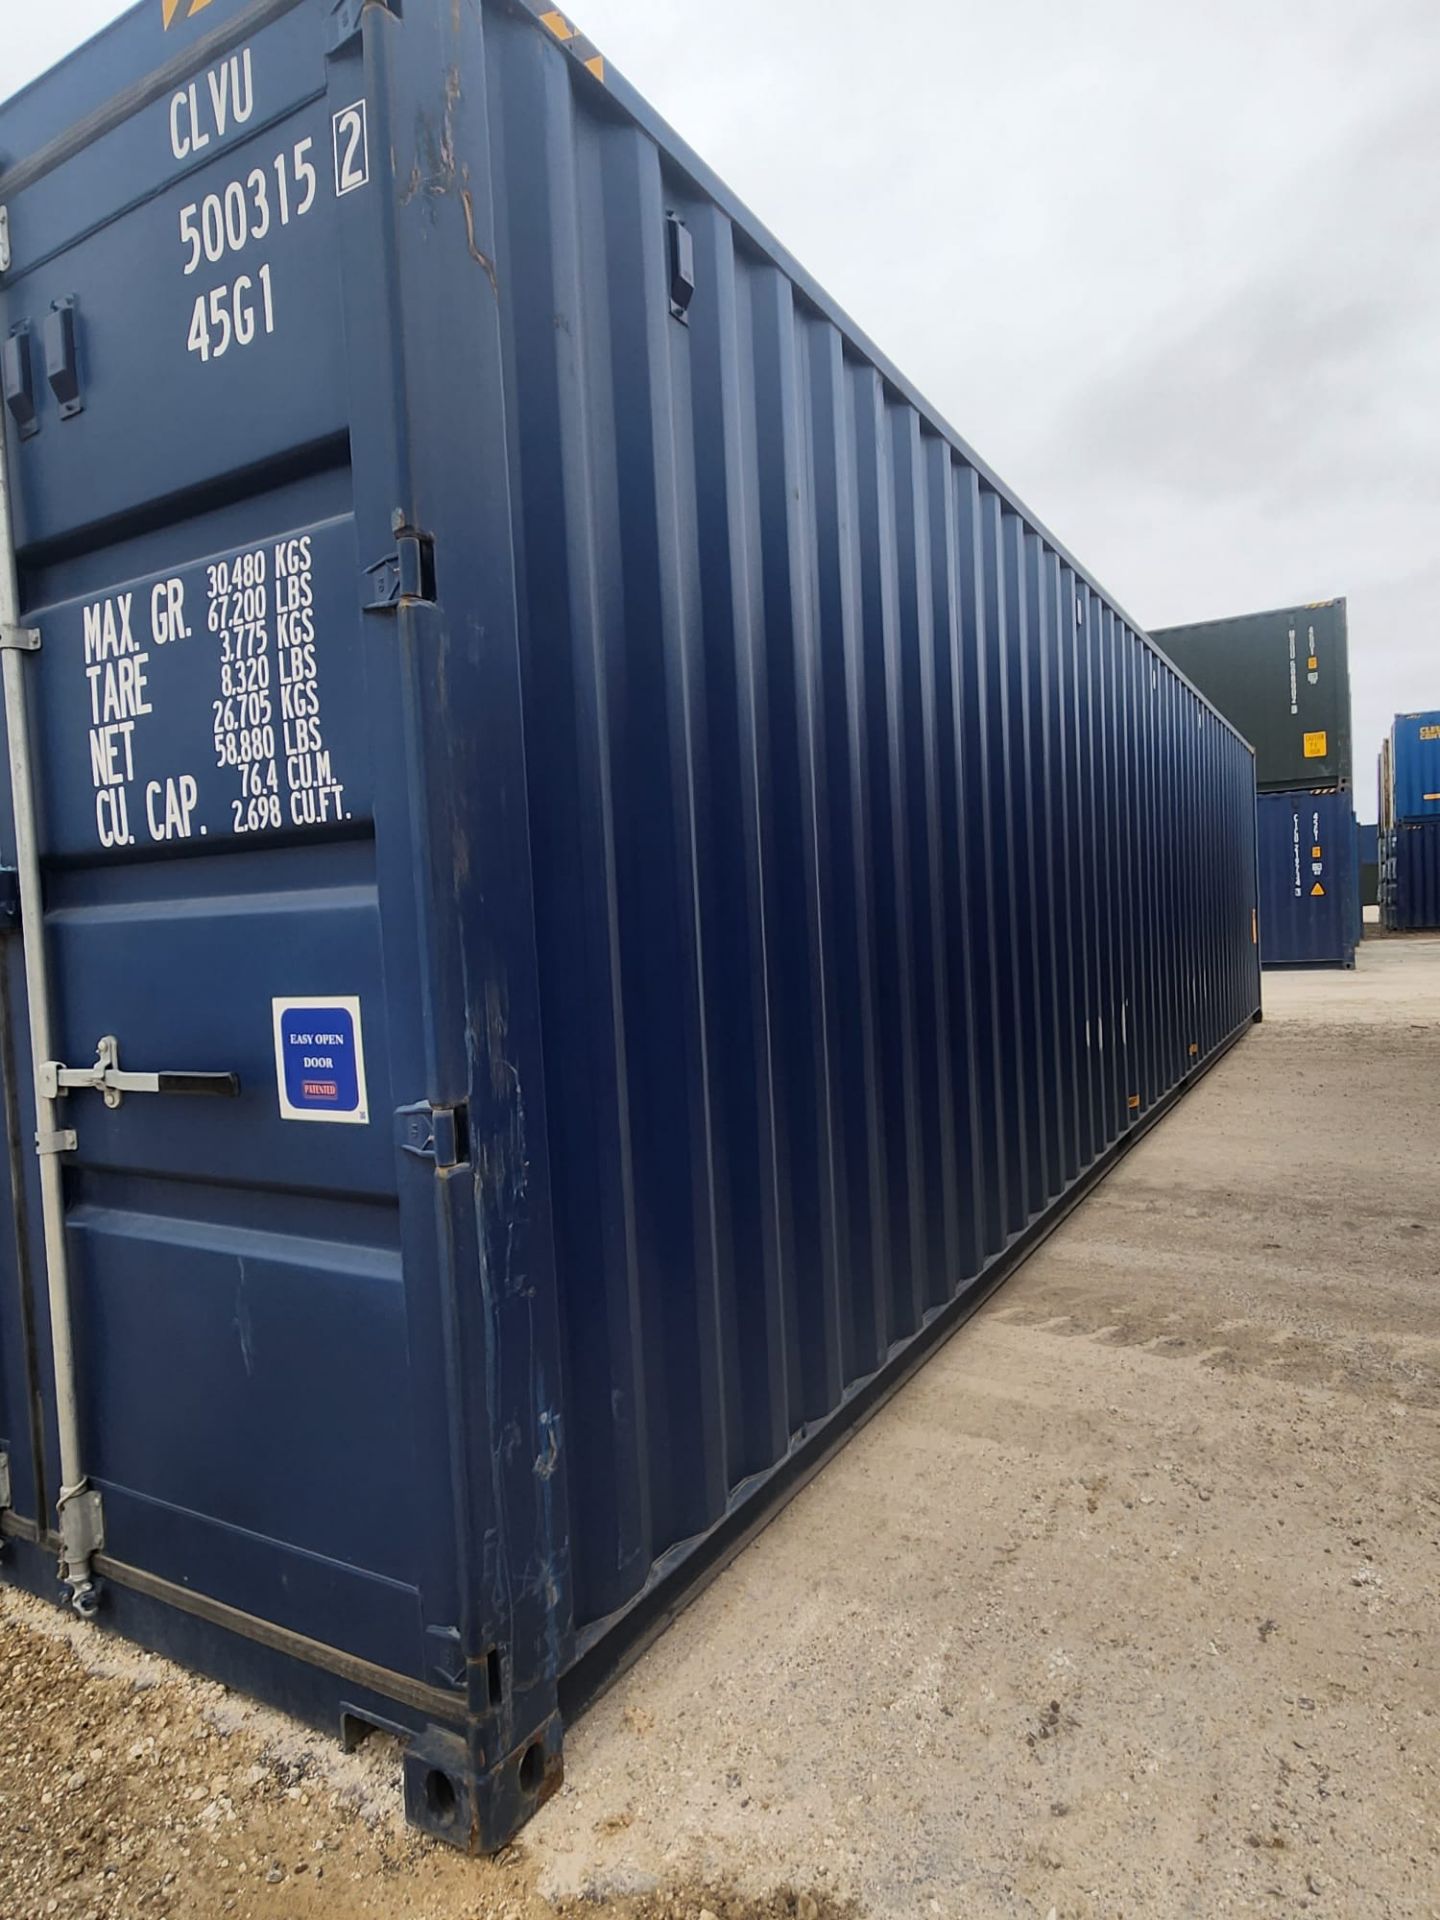 NO RESERVE - 40ft HC Shipping Container - ref CLVU5003152 - Image 5 of 7